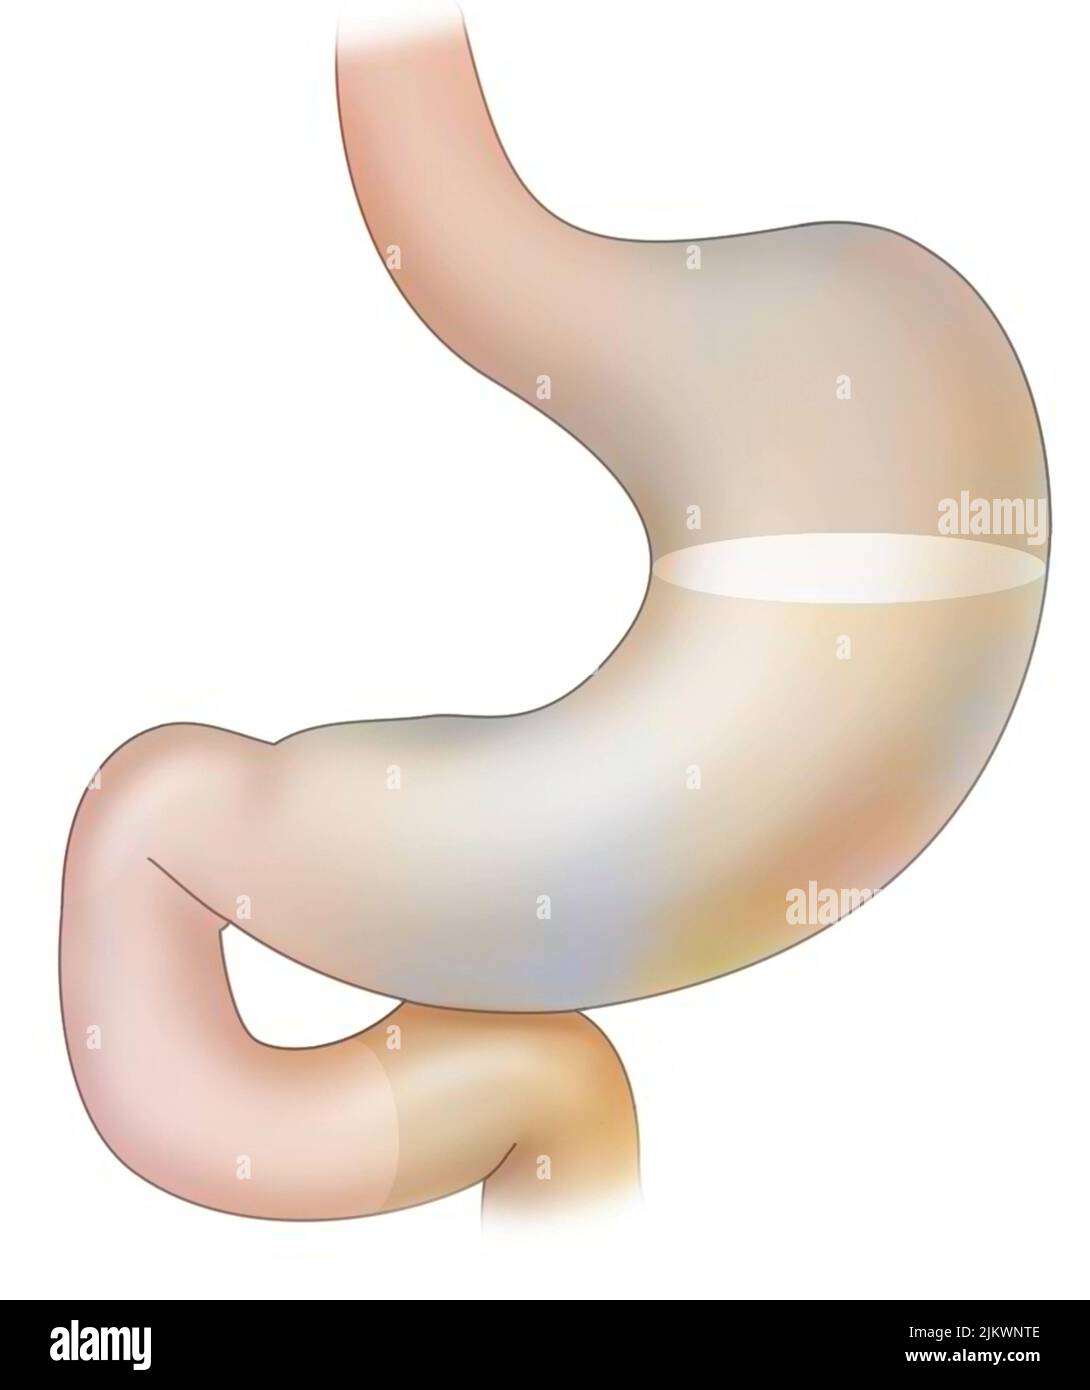 Stomach: the food bolus is represented inside. Stock Photo